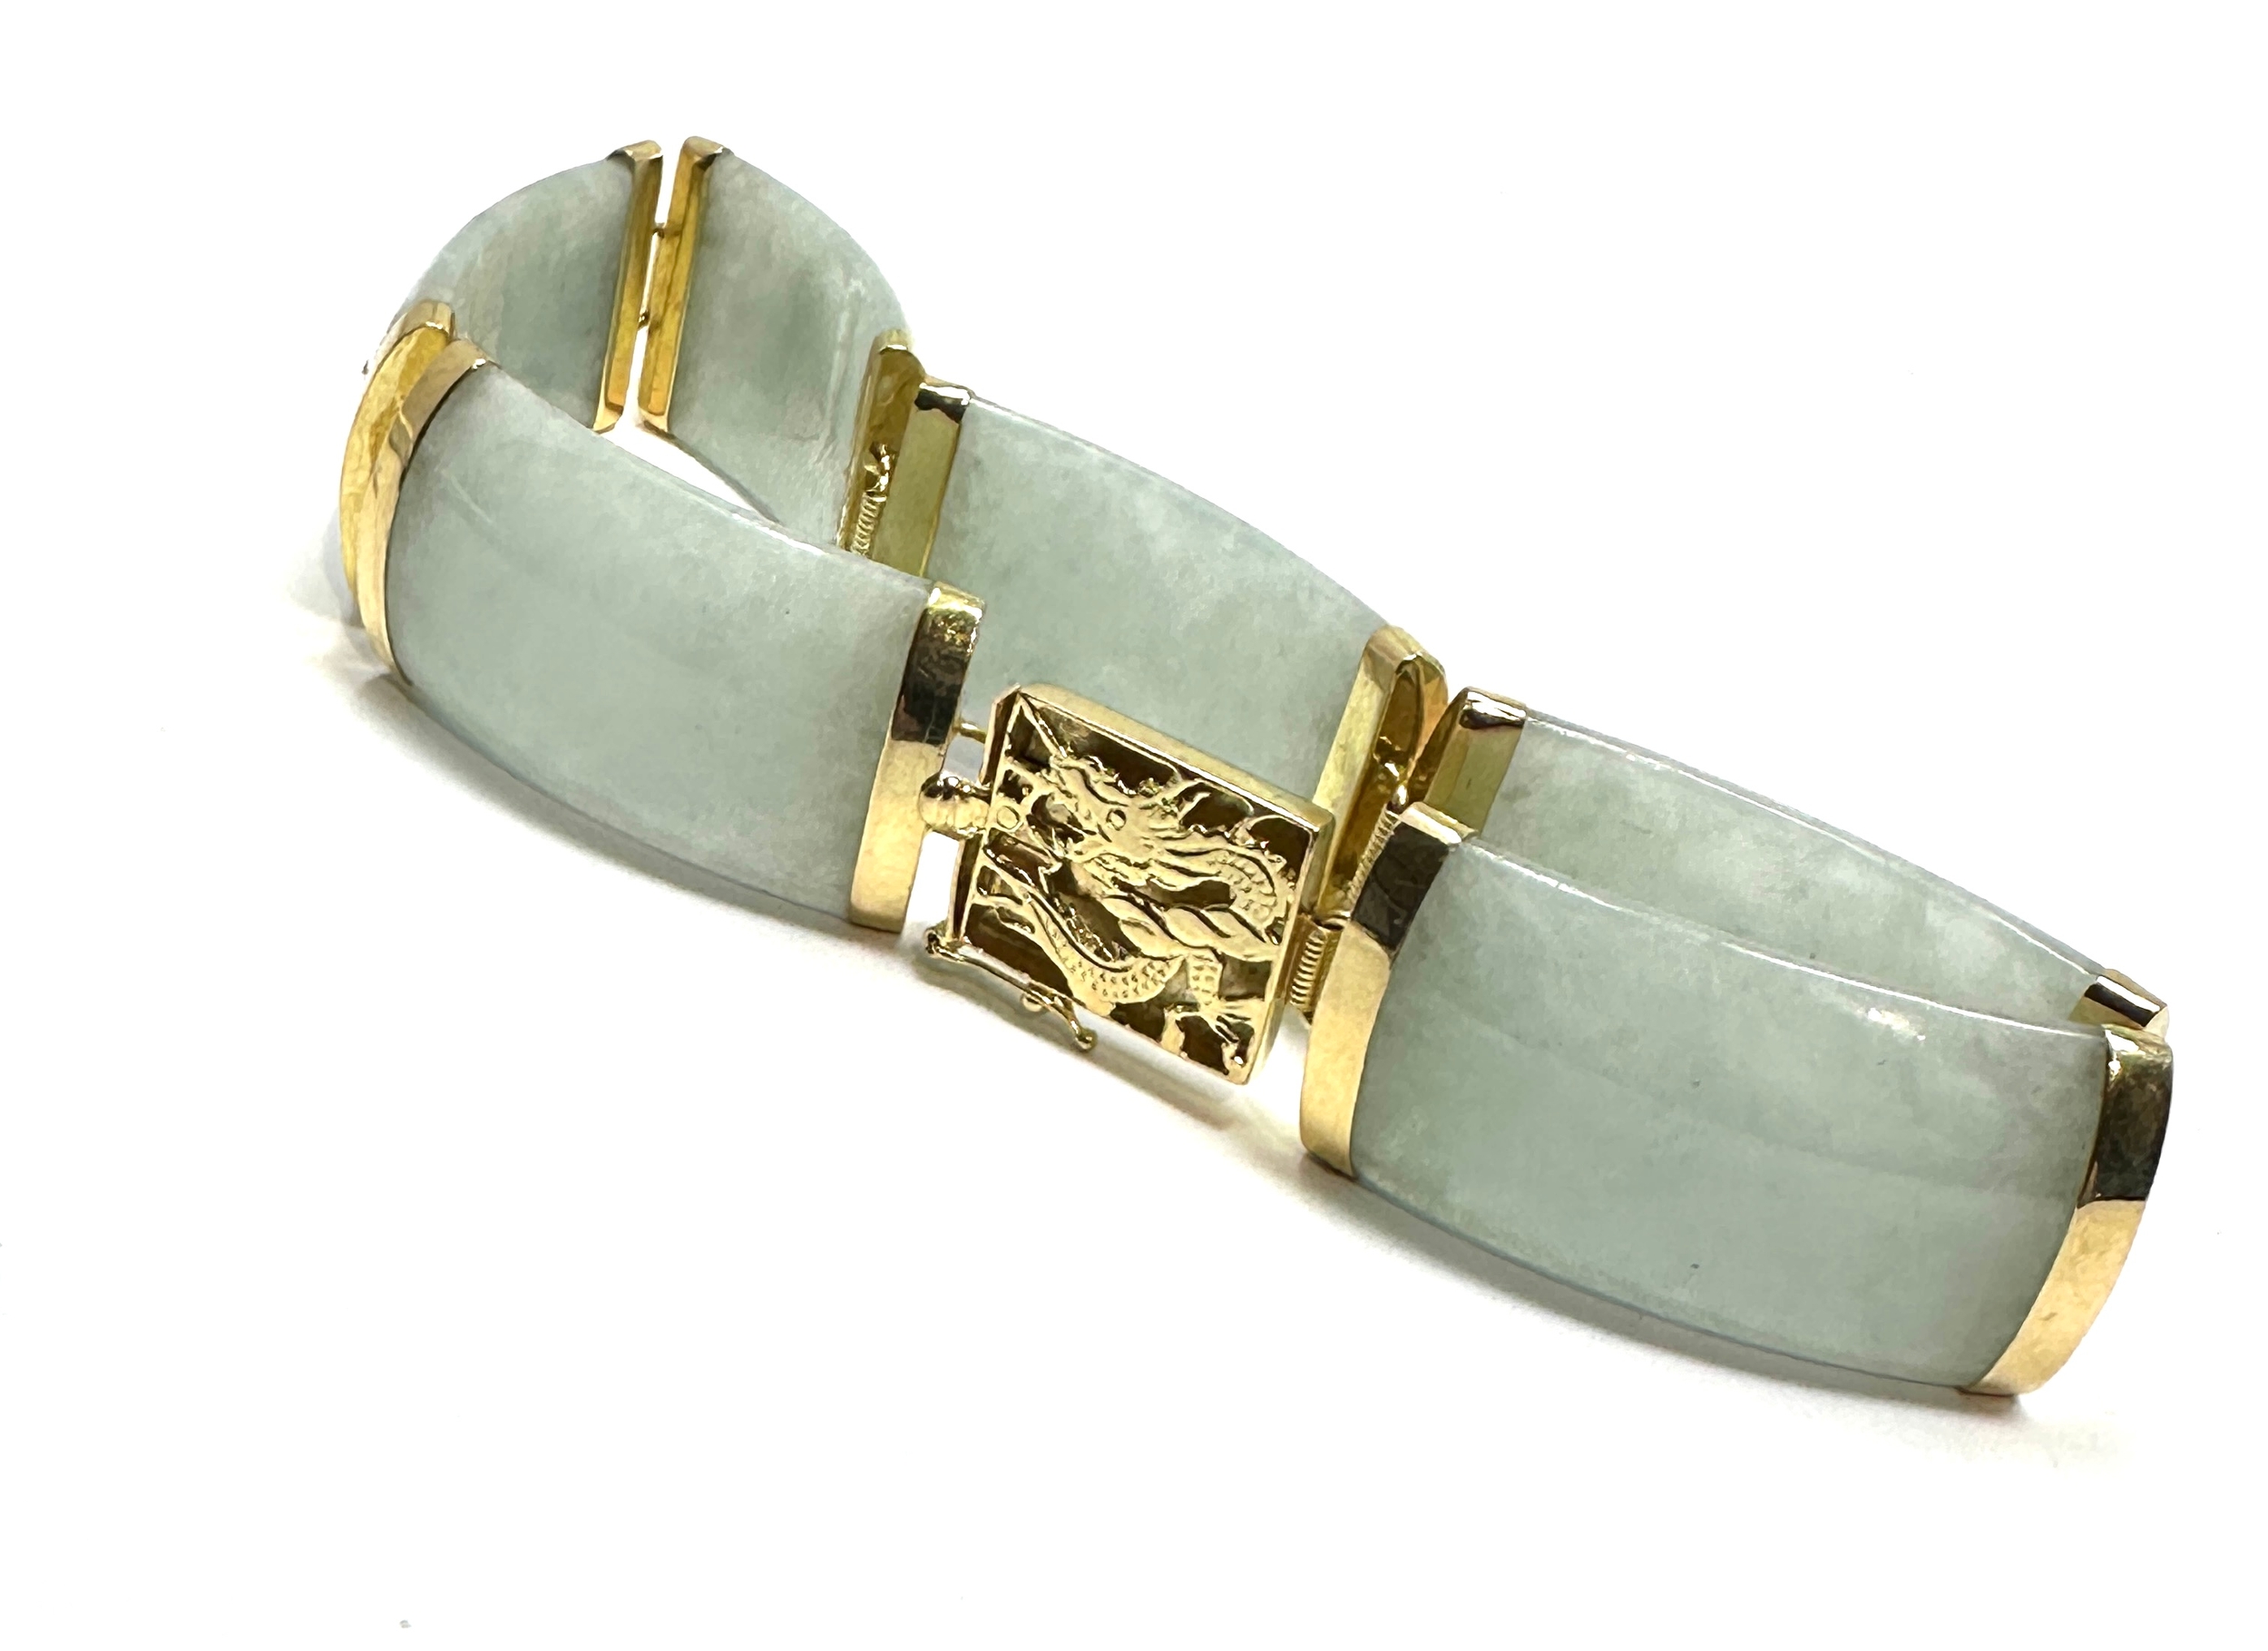 Chinese 14ct gold & jade bracelet jade panels with 14ct gold mounts clasp has dragen details - Image 4 of 4